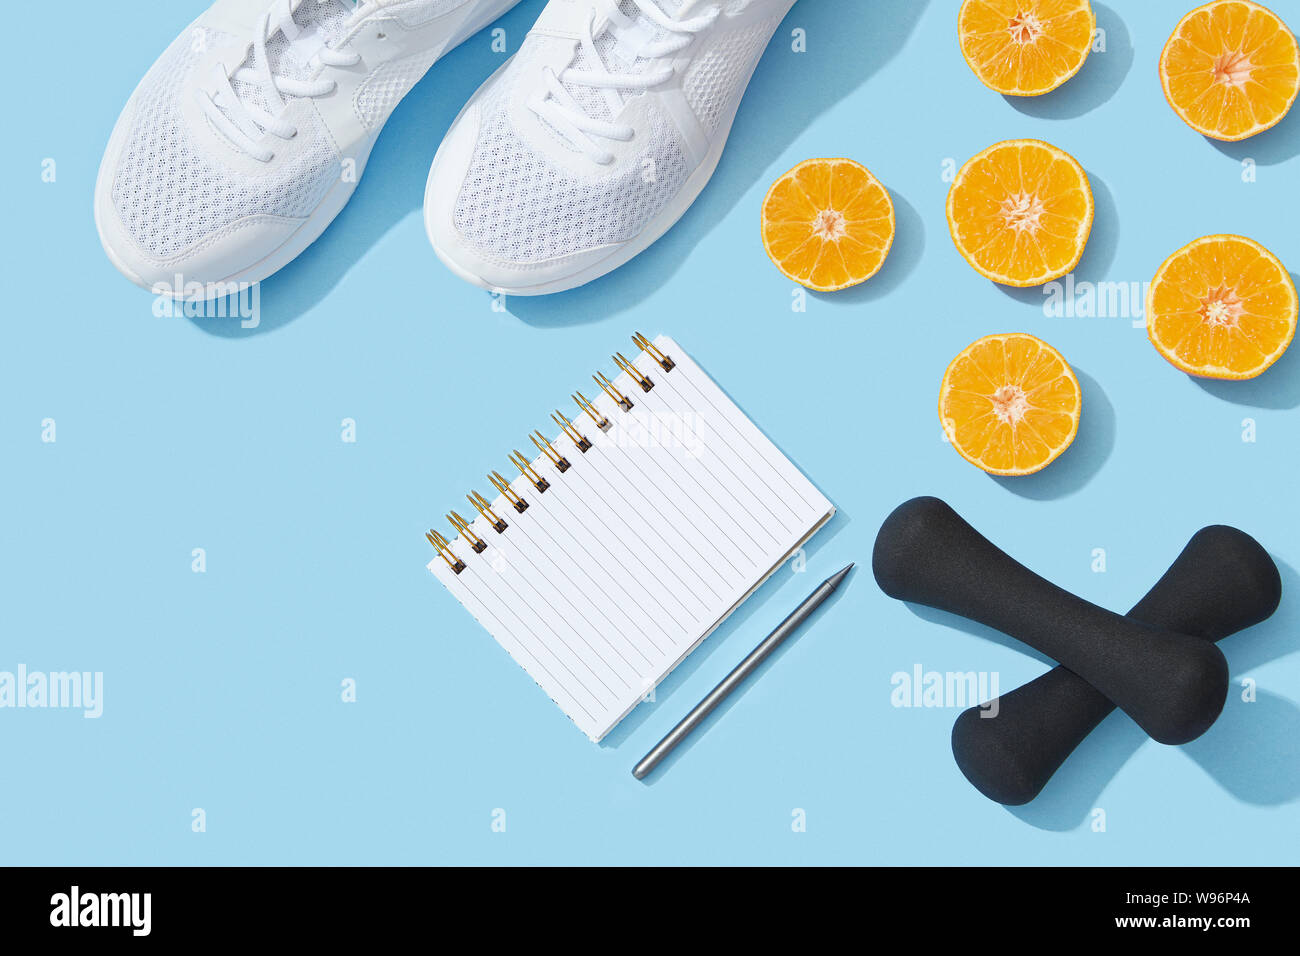 Sport flat lay with gym equipment and accessories on blue background Stock Photo